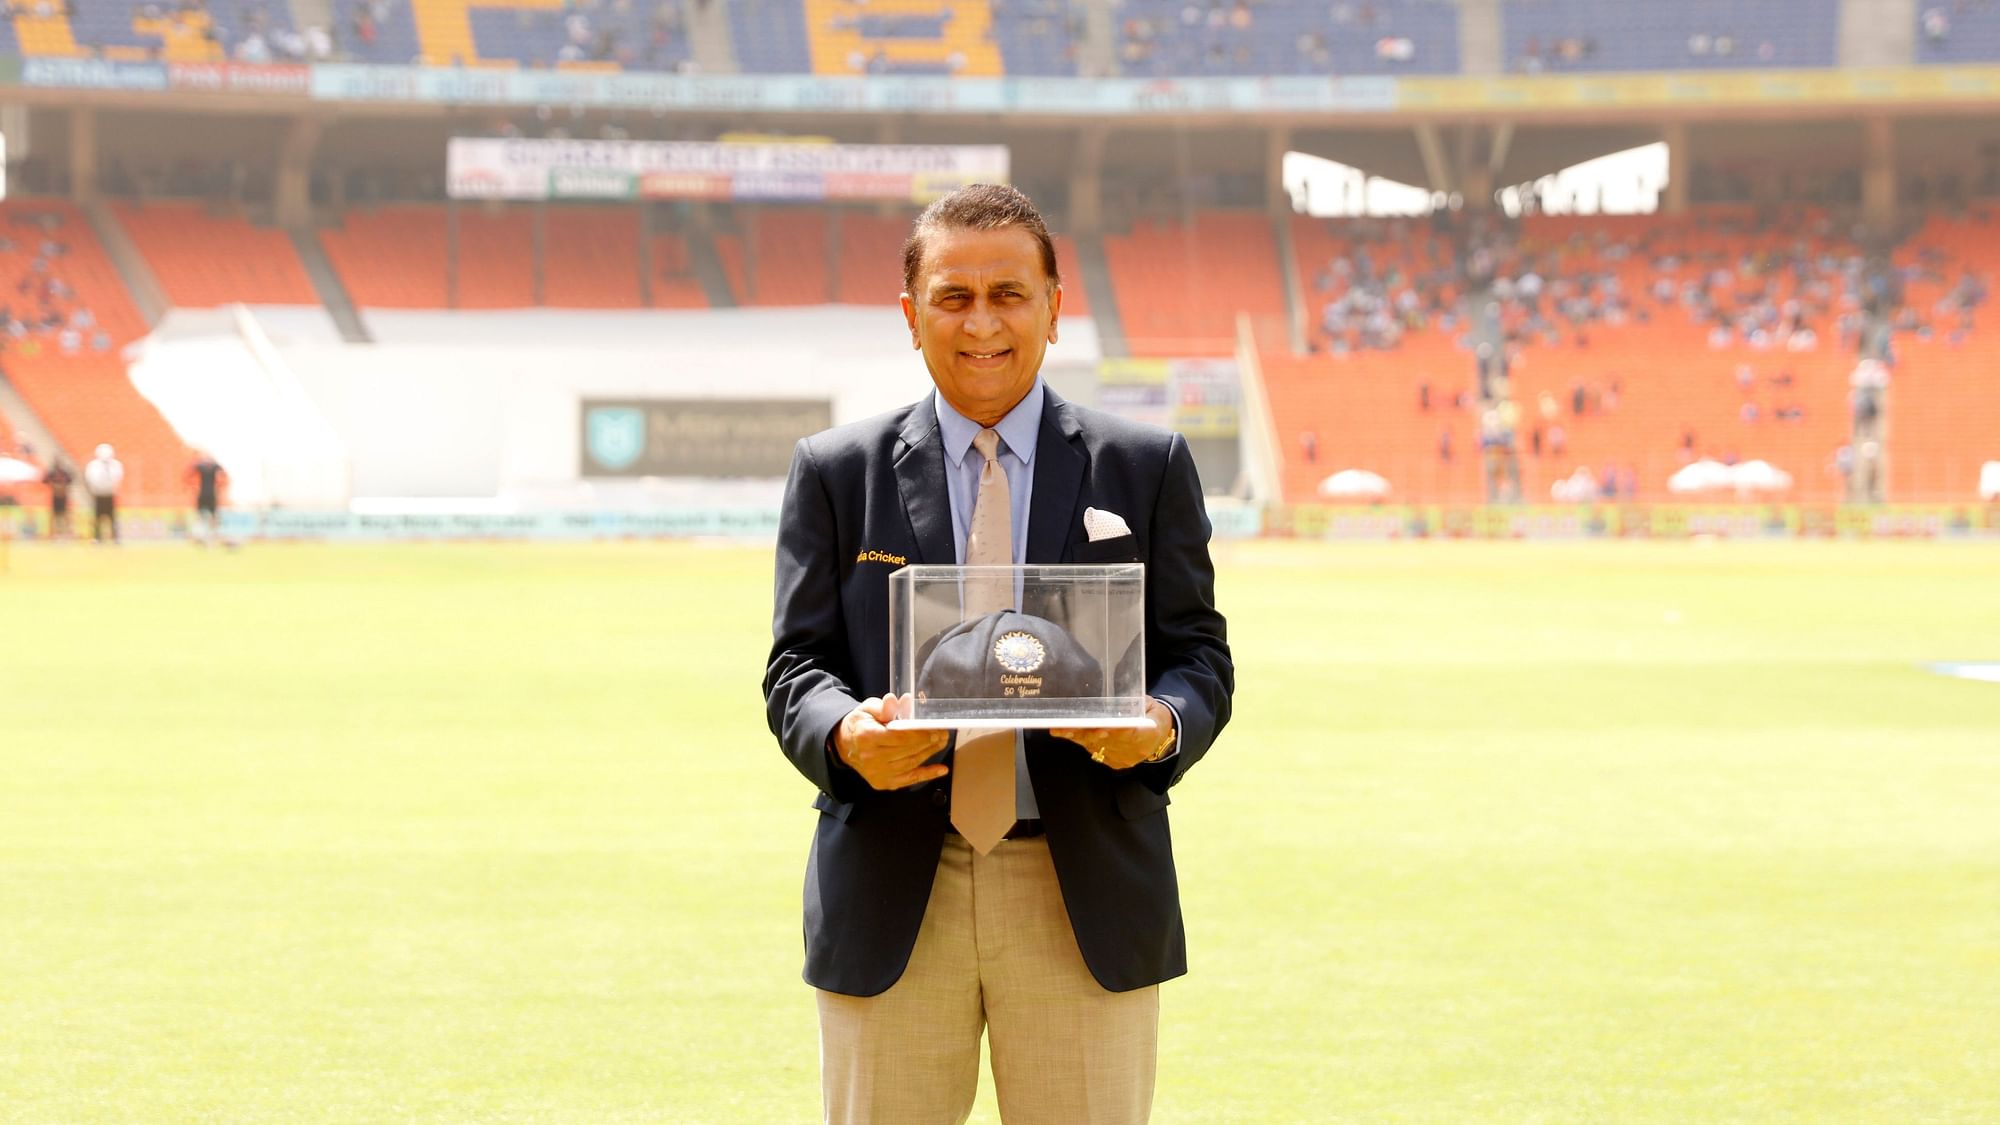 Sunil Gavaskar on his 10,000 Test runs anniversary during the Day 3 of the fourth PayTM Test match between India and England held at the Gujarat’s Narendra Modi Stadium on the 6 March 2021.